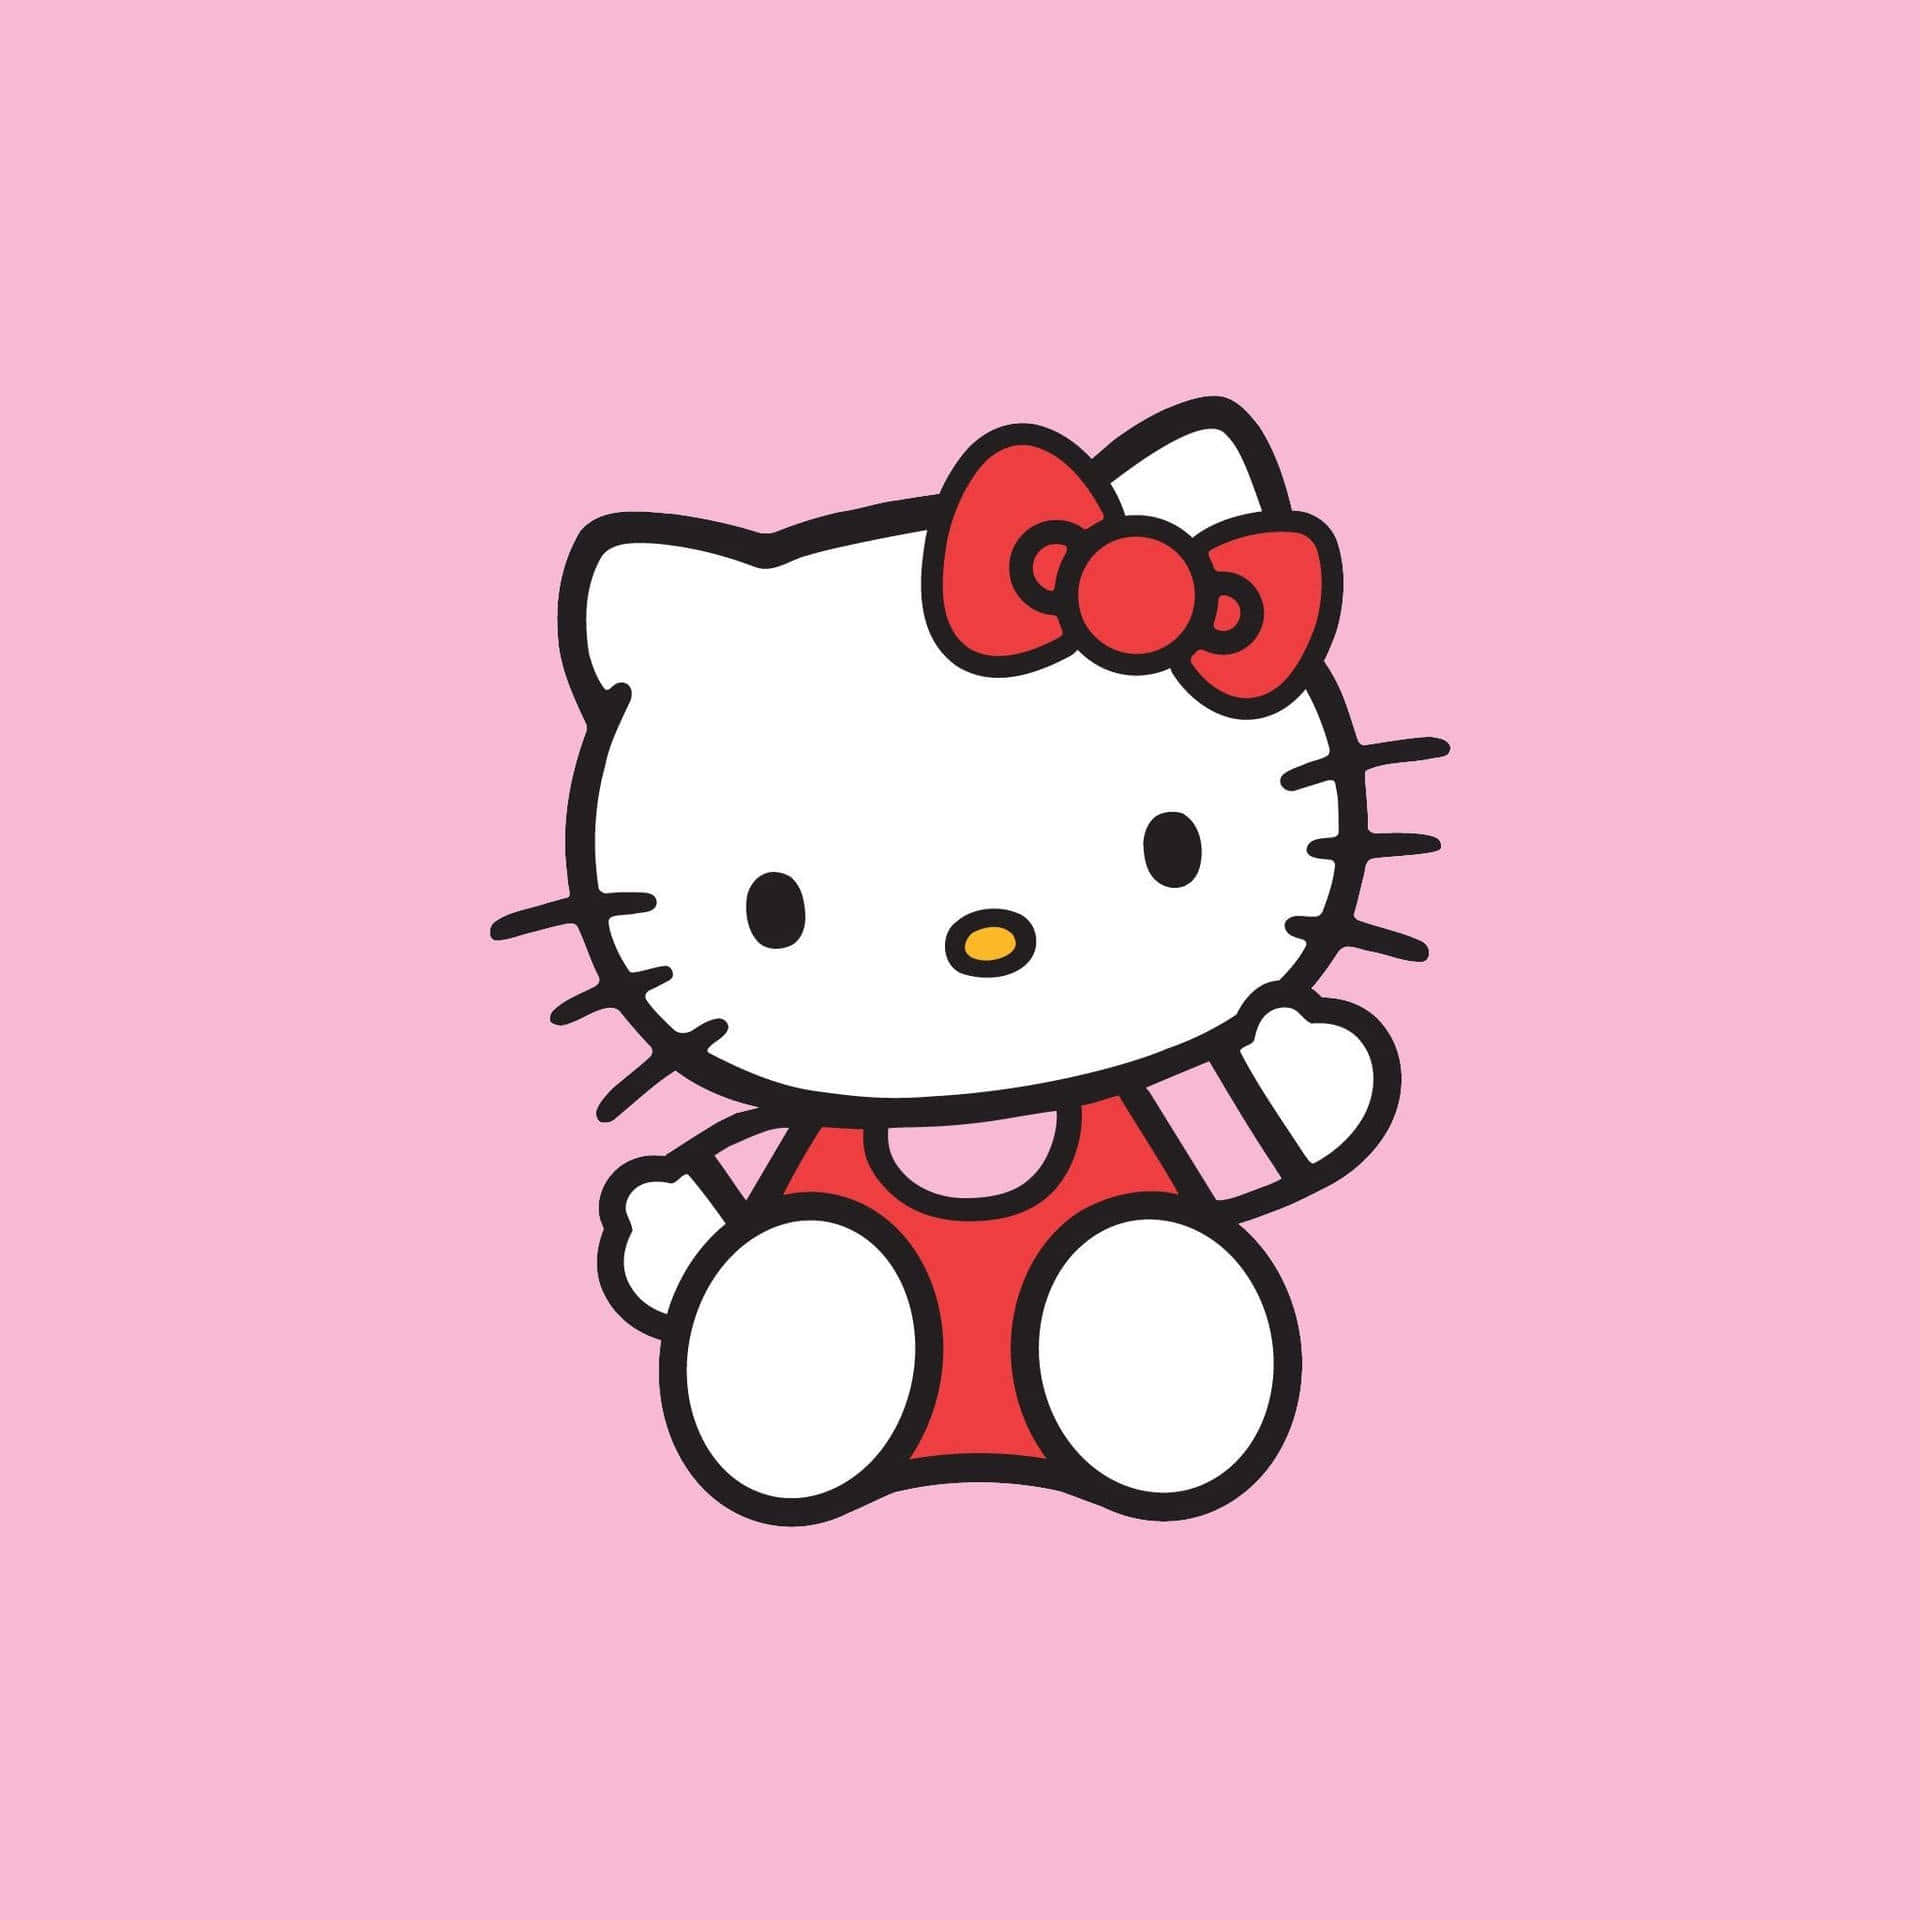 Kitty White posing on a pink floral background Wallpaper